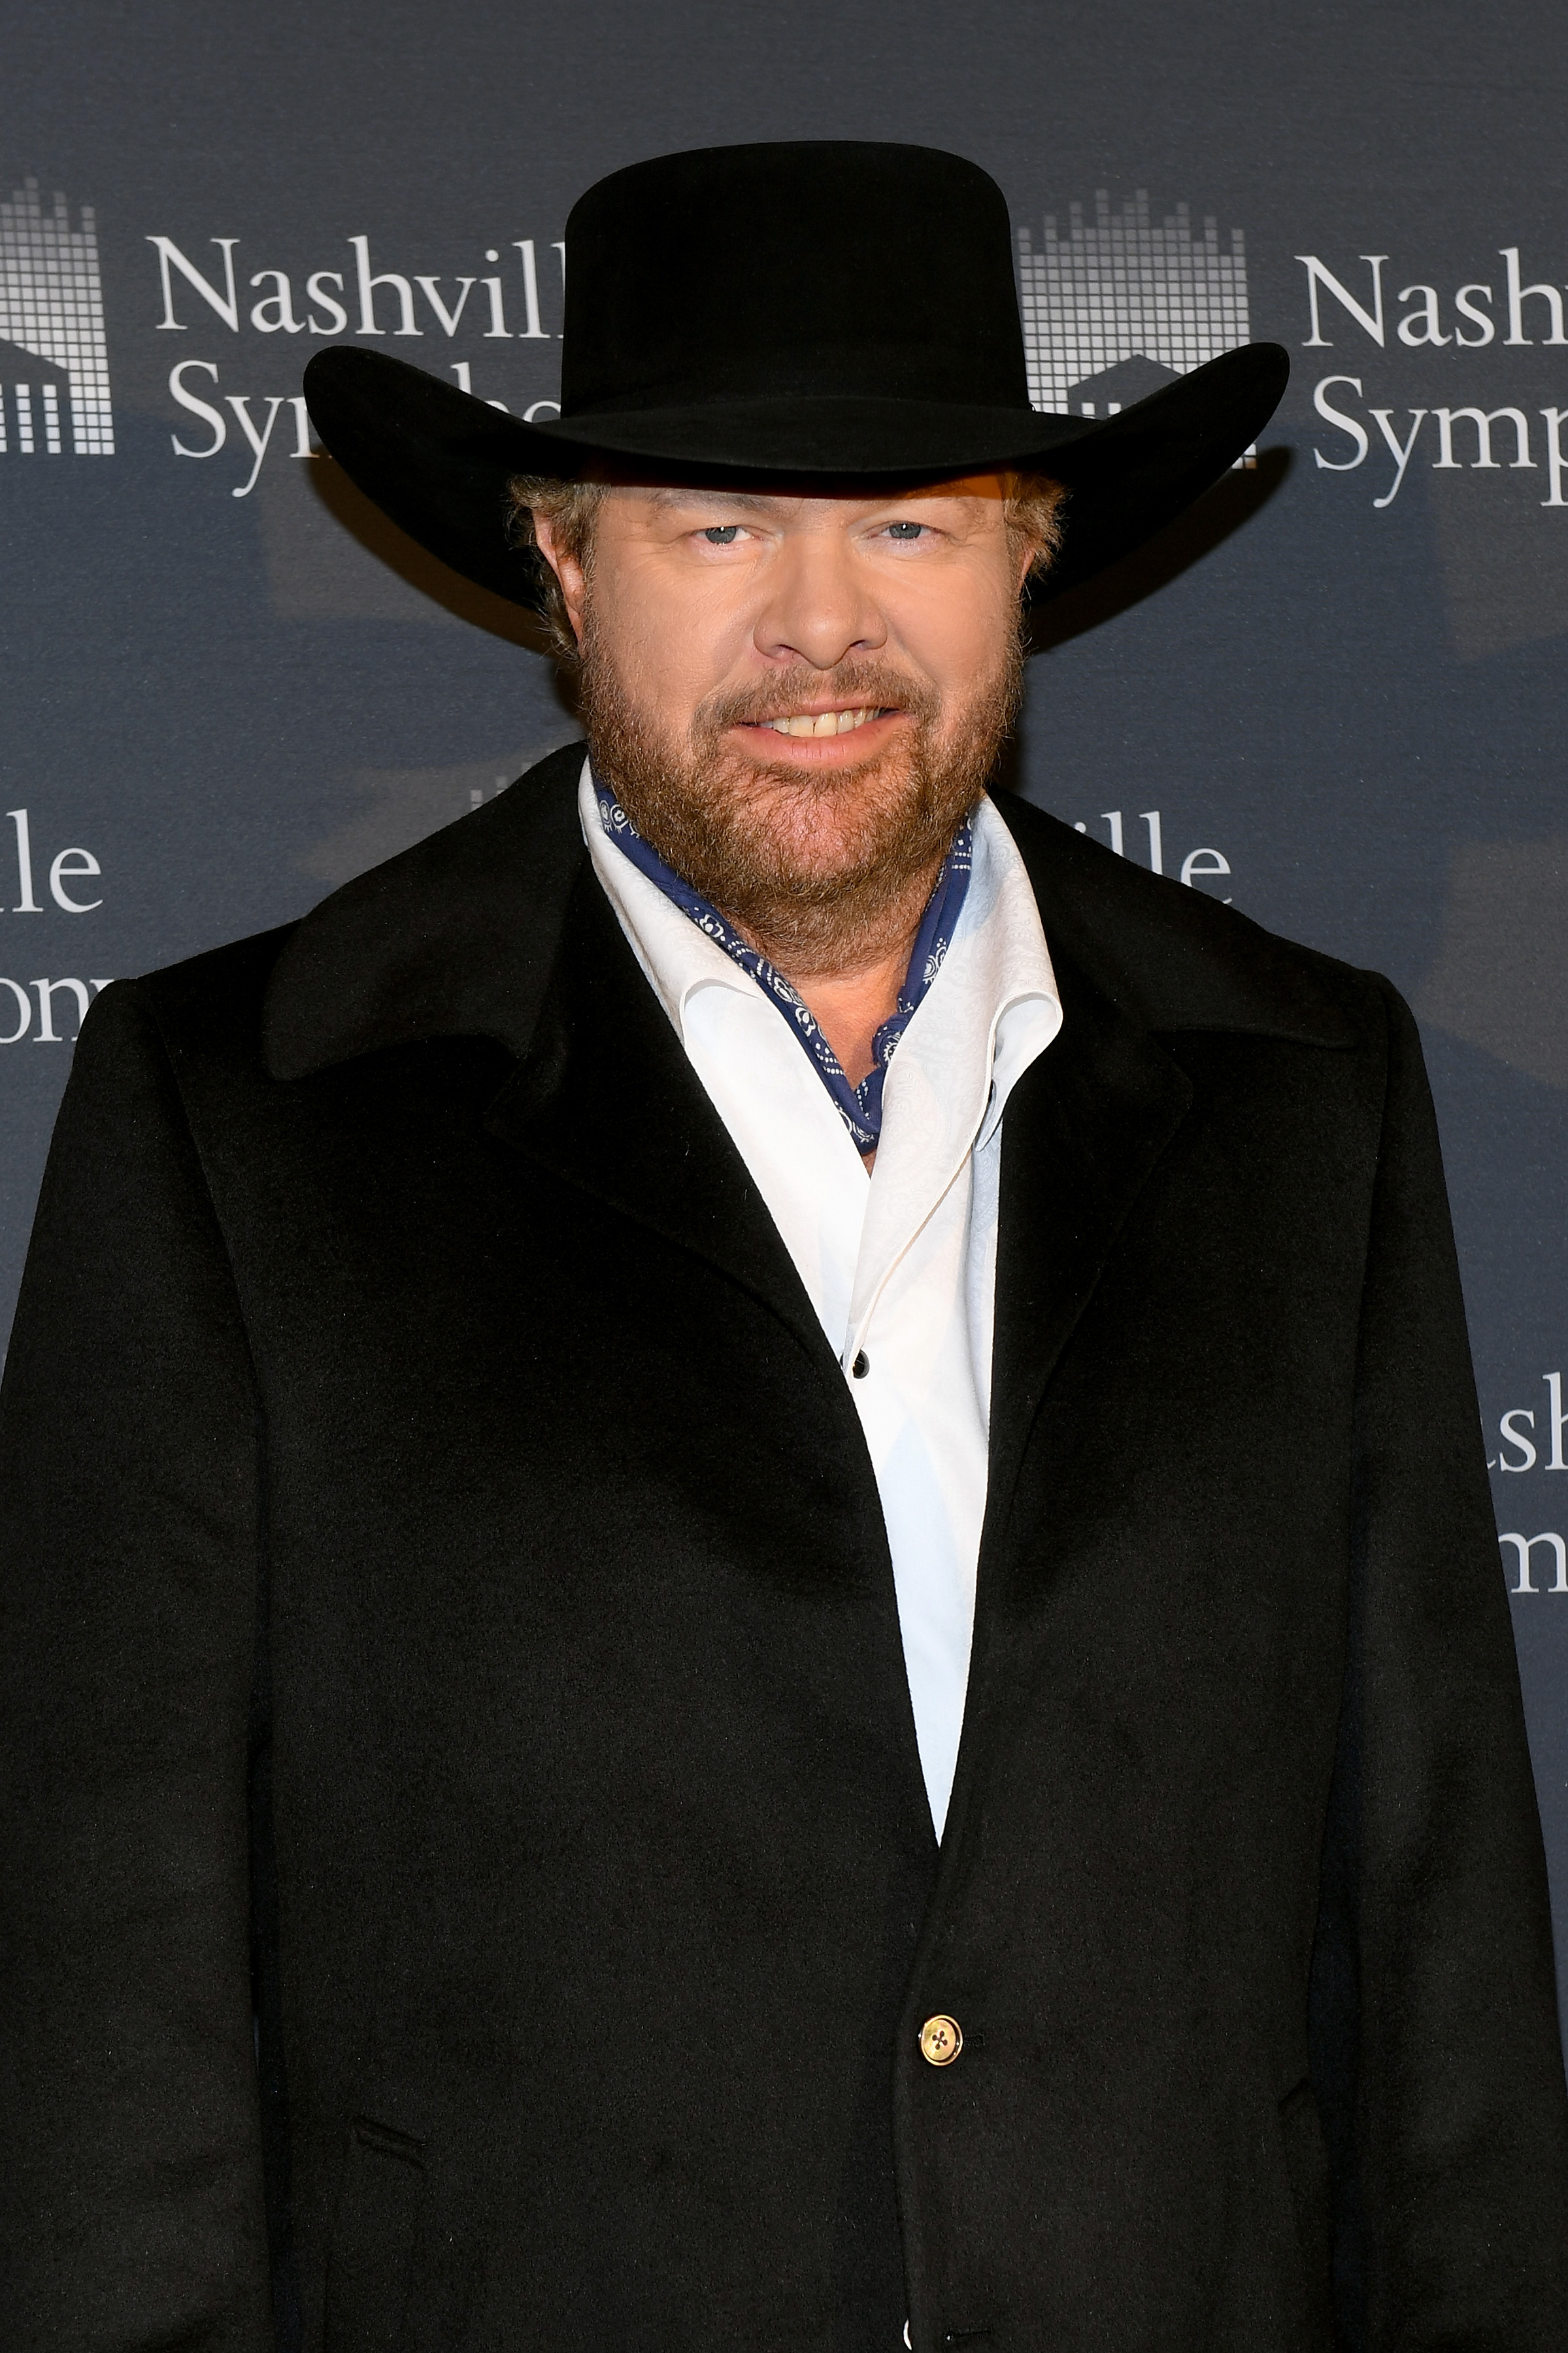 Toby Keith attends the 34th Annual Nashville Symphony Ball in Nashville, Tennessee on December 8, 2018 | Source: Getty Images